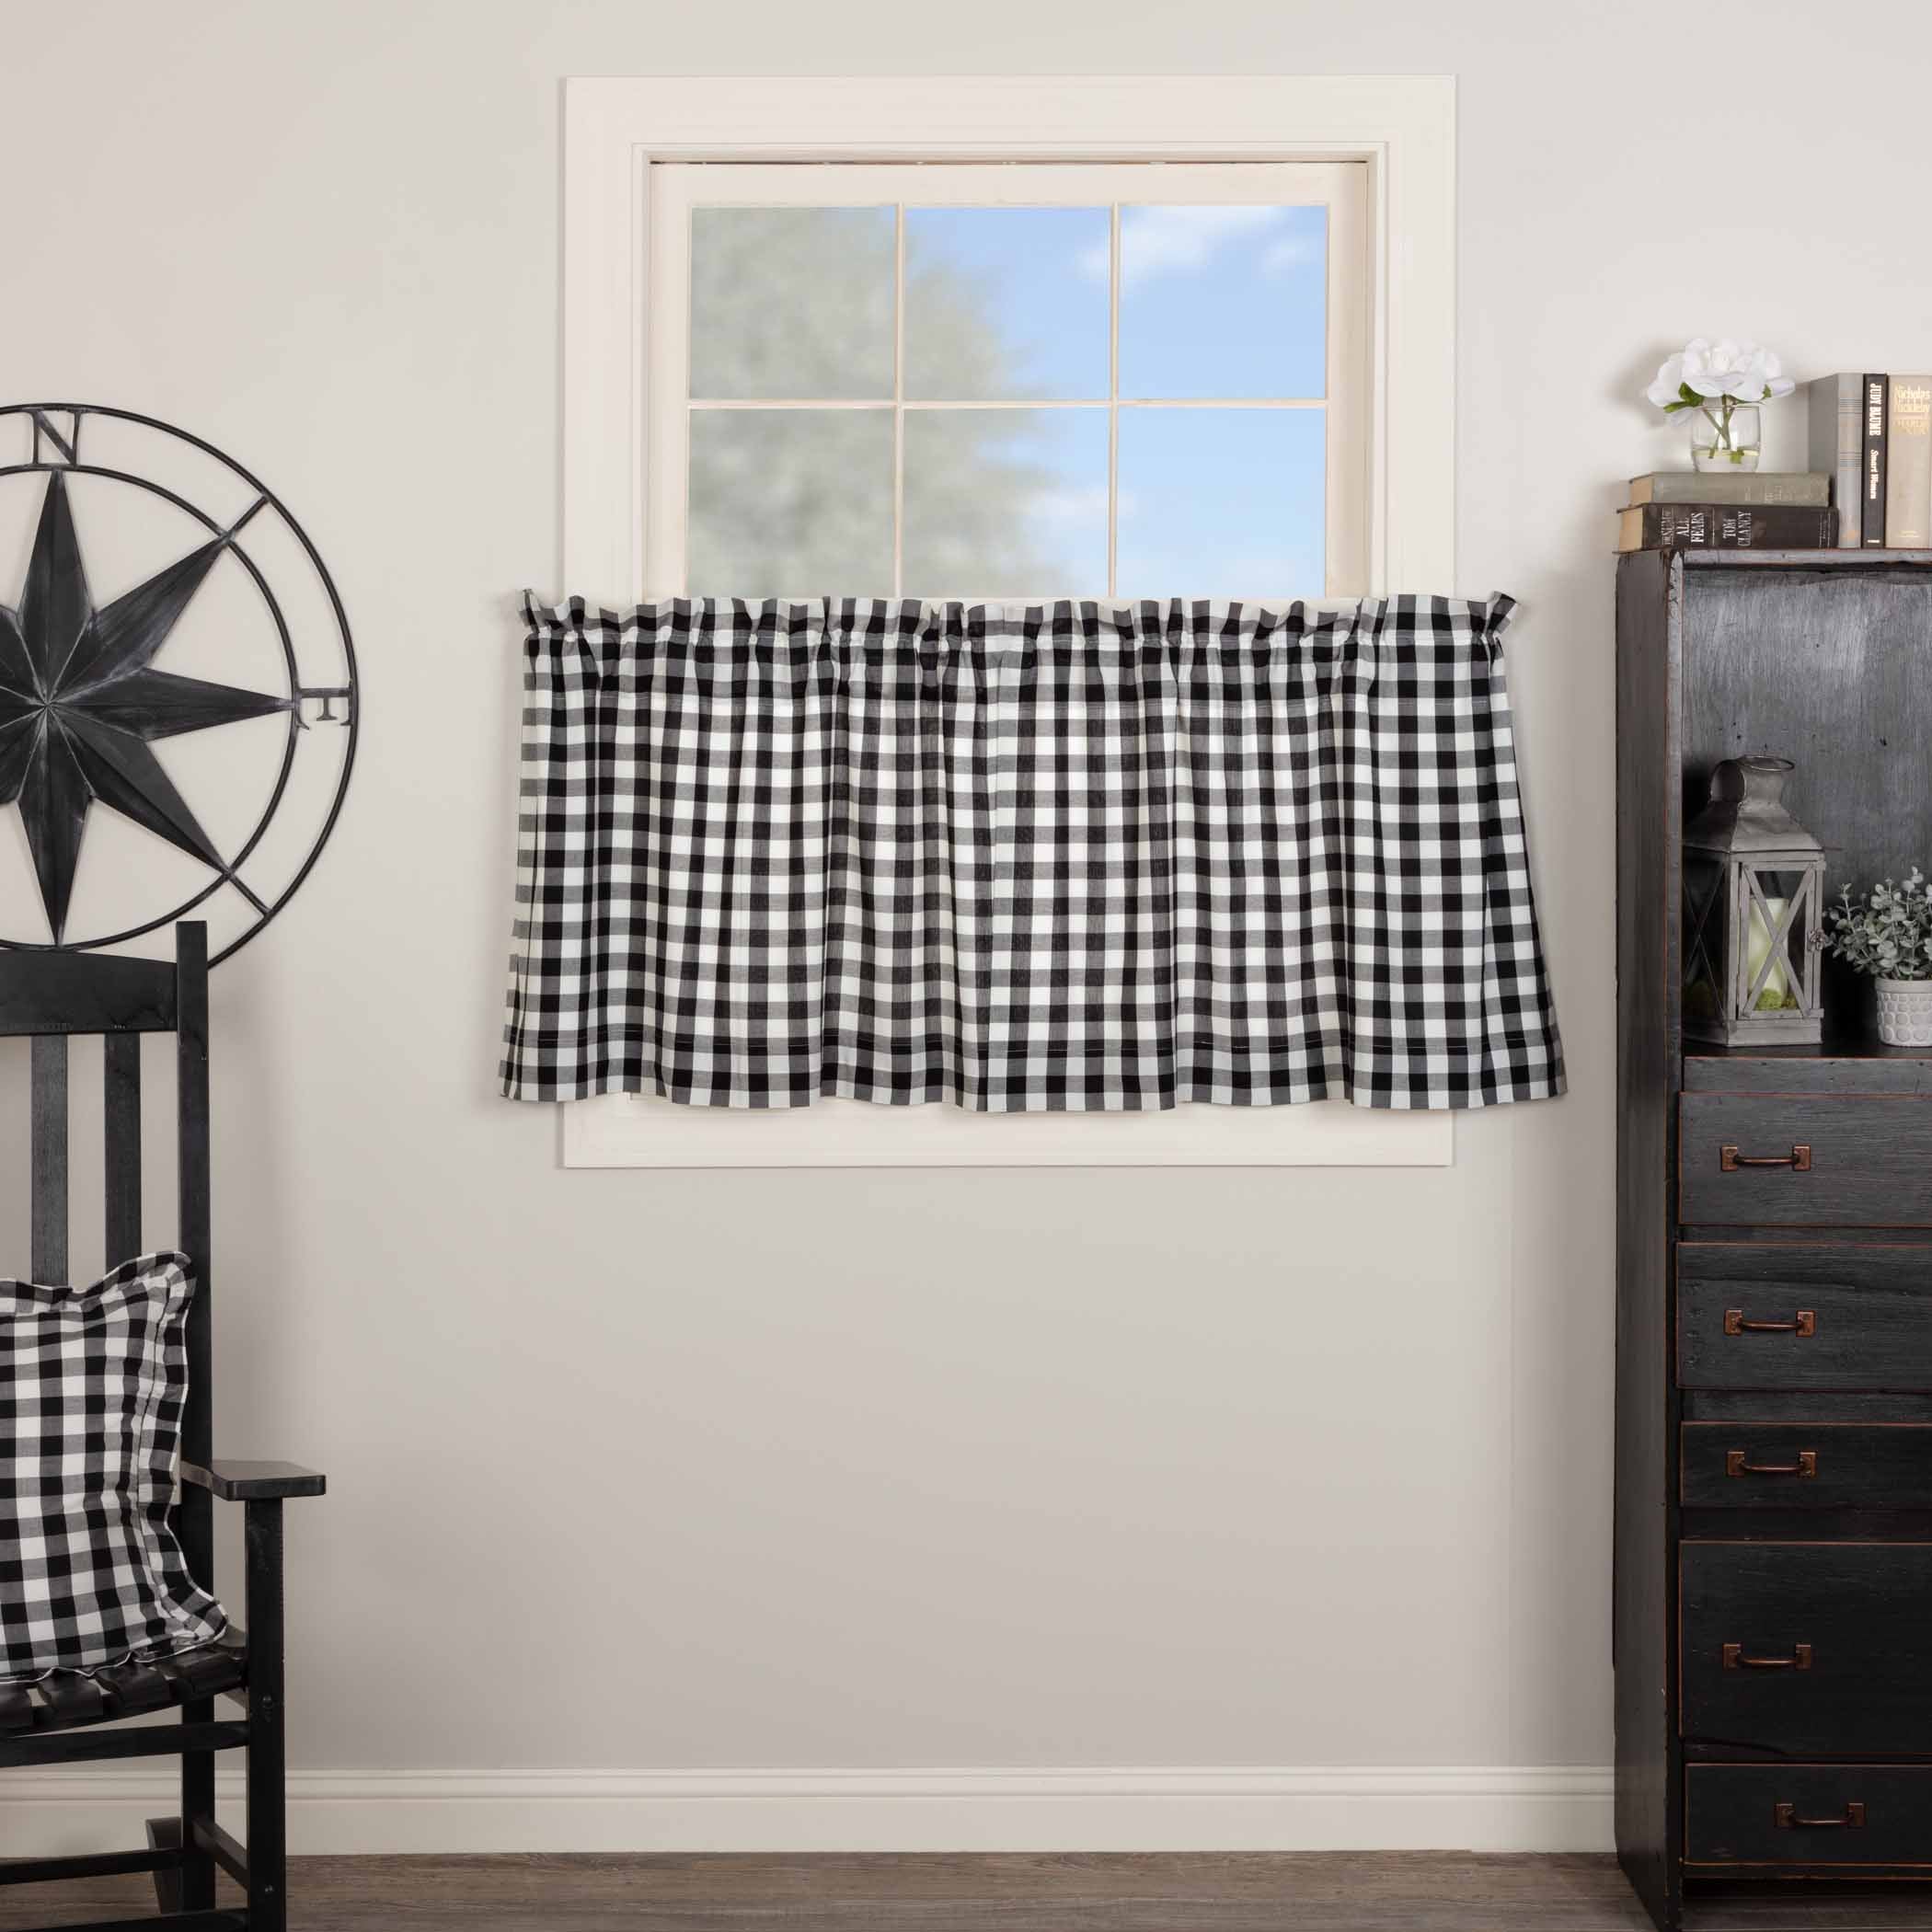 April & Olive Annie Buffalo Black Check Tier Set of 2 L24xW36 By VHC Brands